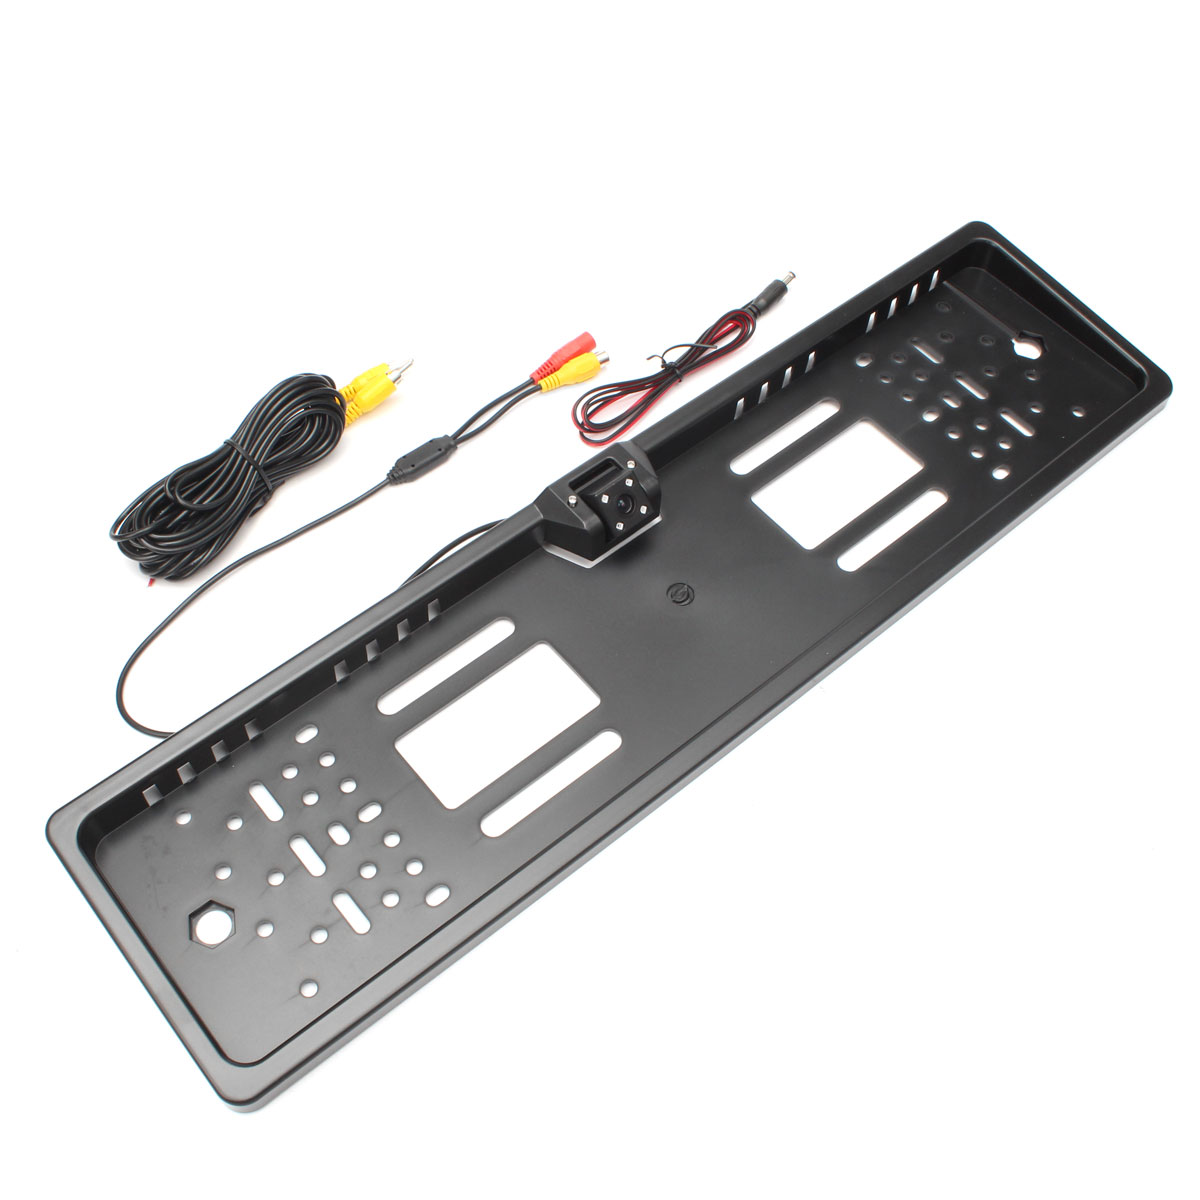 Reversing-HD-Car-Rear-View-Camera-Parking-Plate-Night-Vision-With-LED-White-Light-1380860